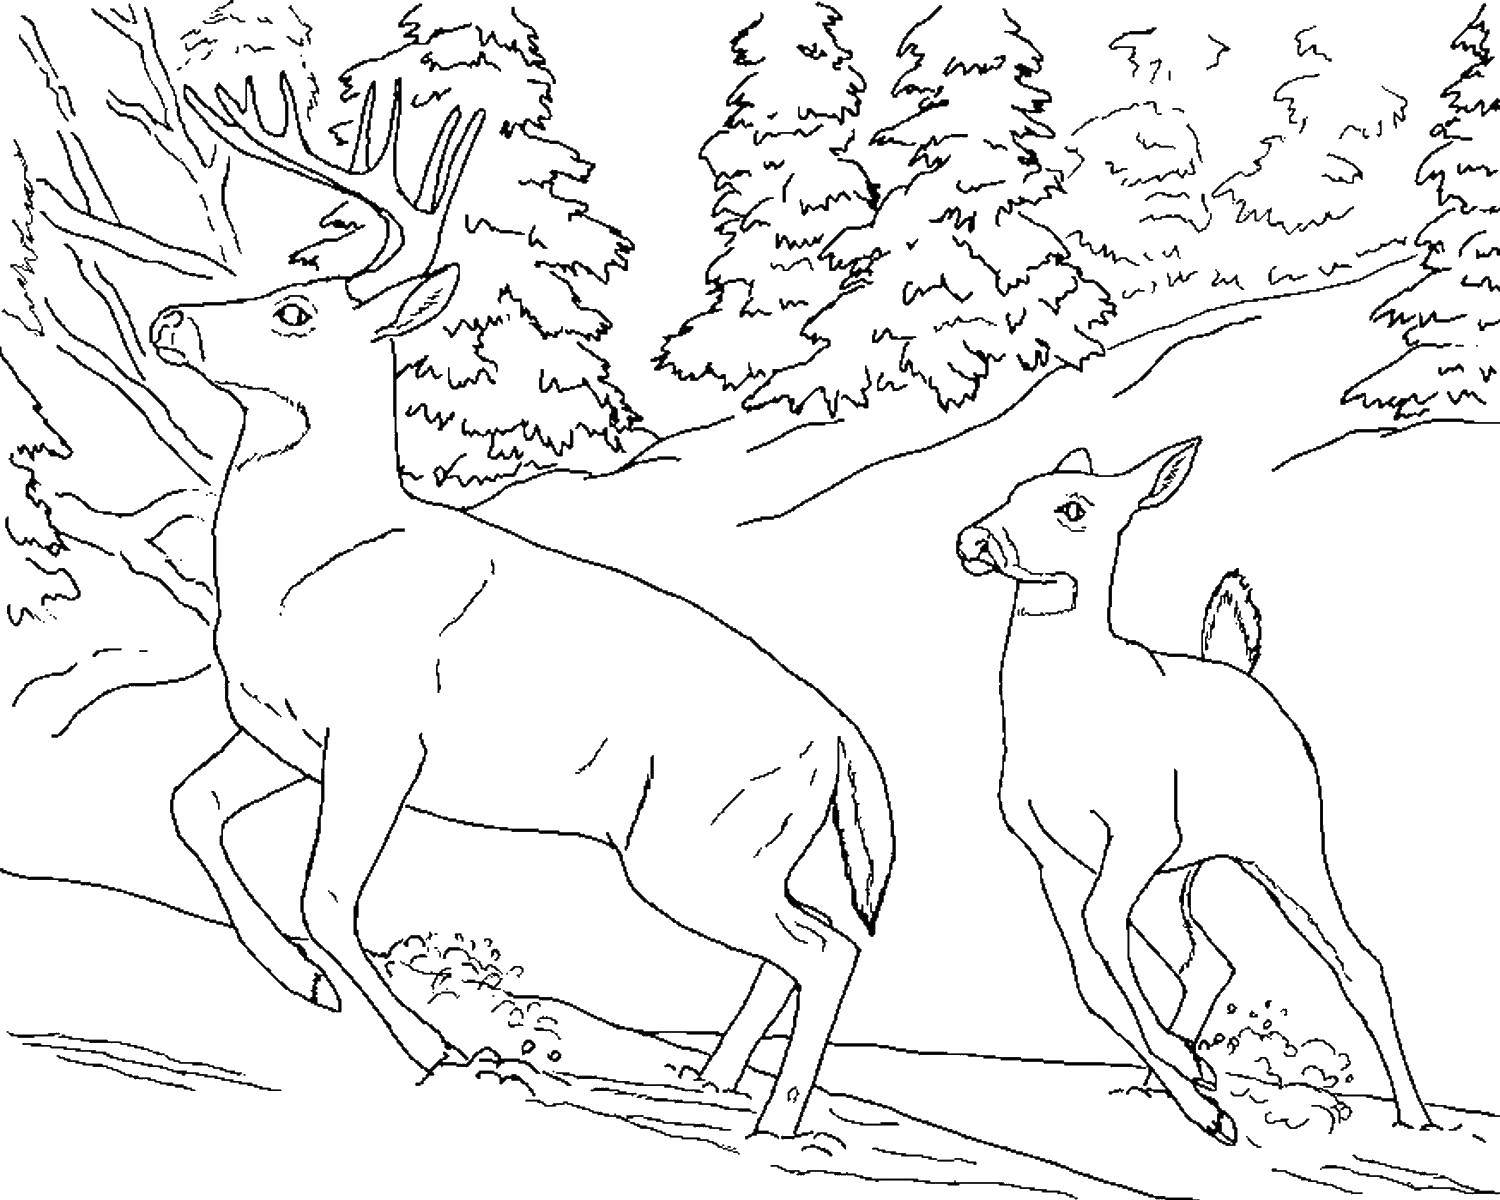 Coloring Animals. Category Nature. Tags:  animals, nature, winter.